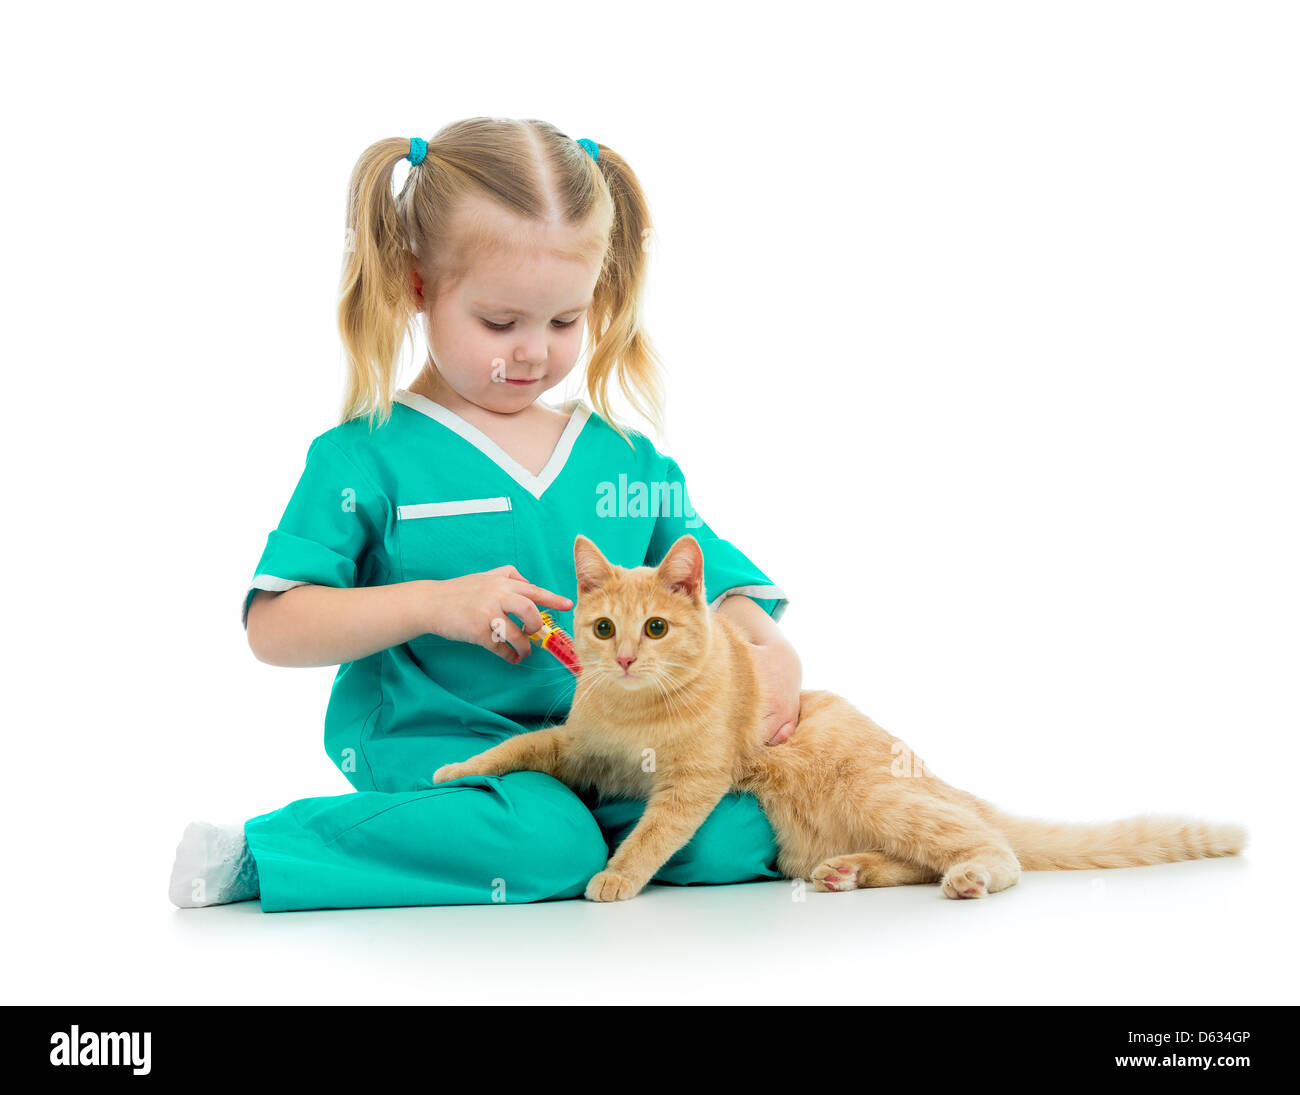 Cute kid girl playing doctor avec cat isolated Banque D'Images